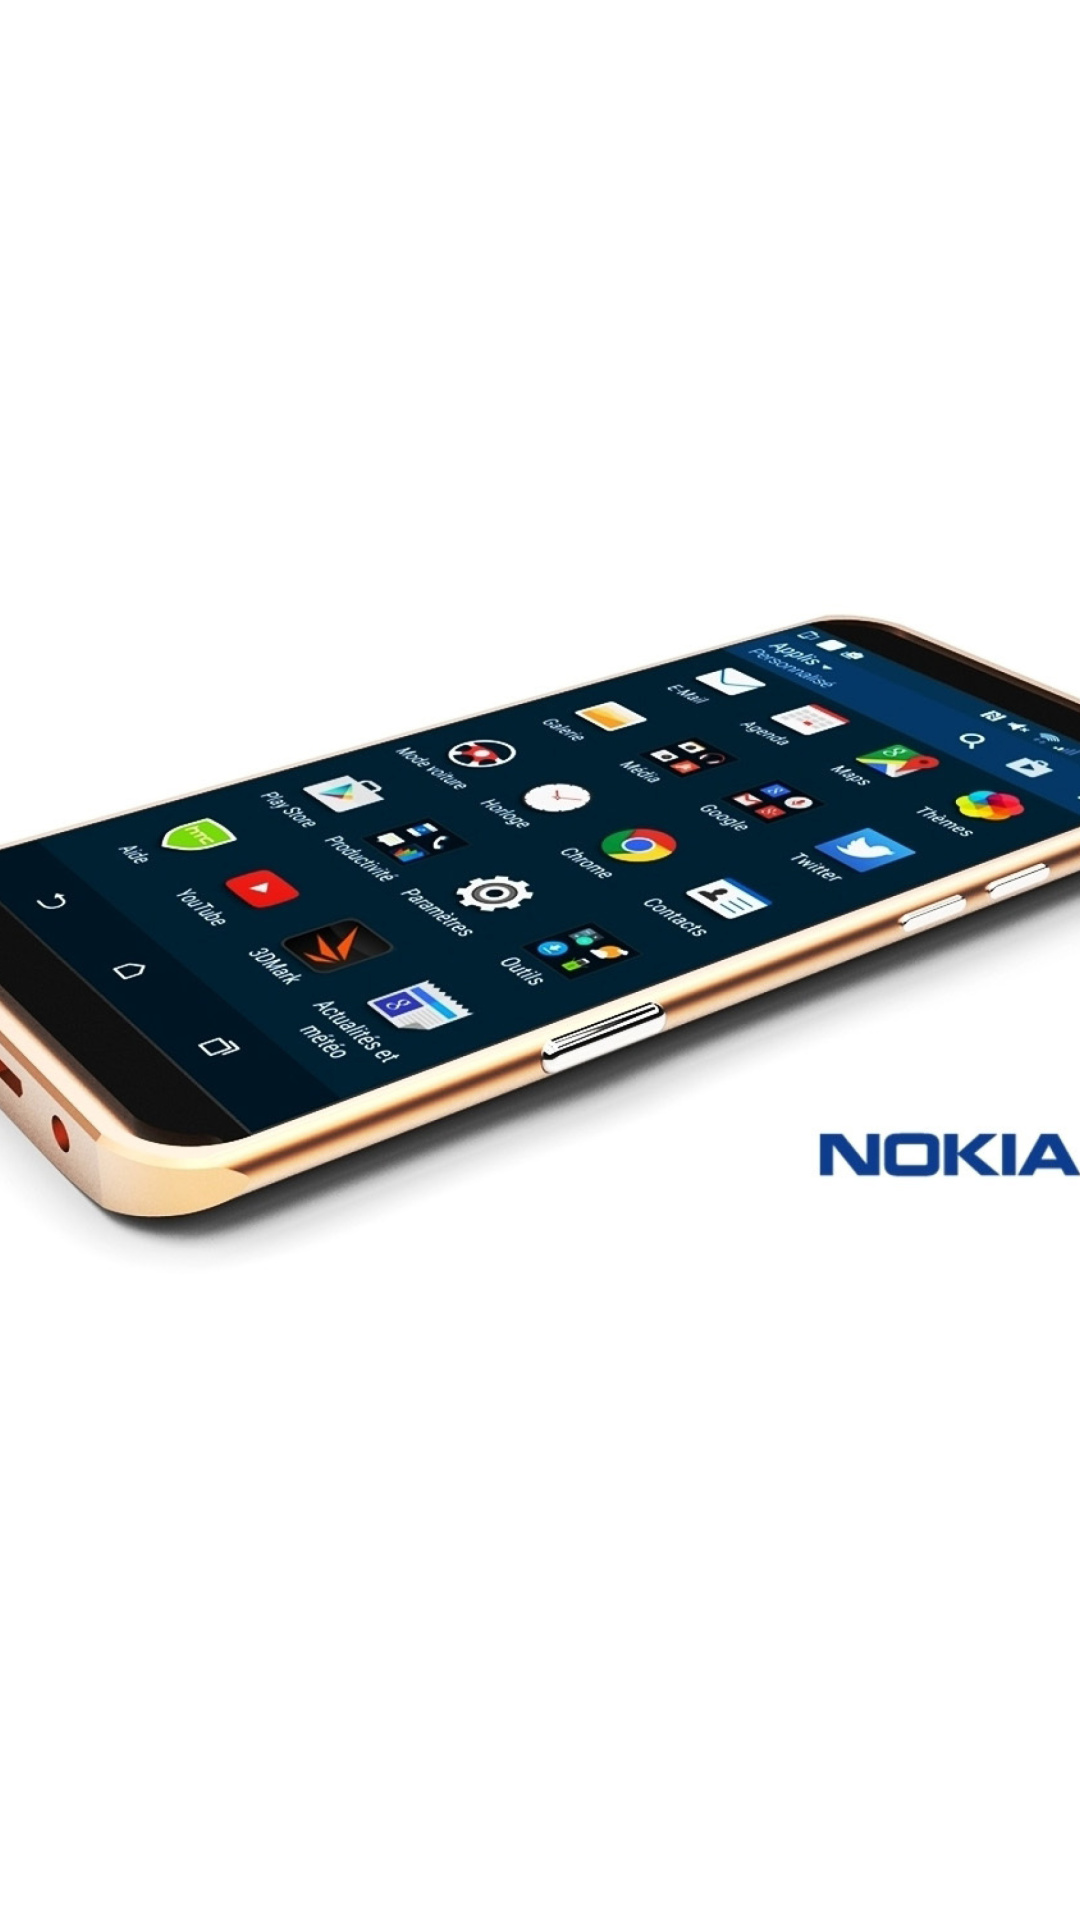 Android Nokia A1 wallpaper 1080x1920